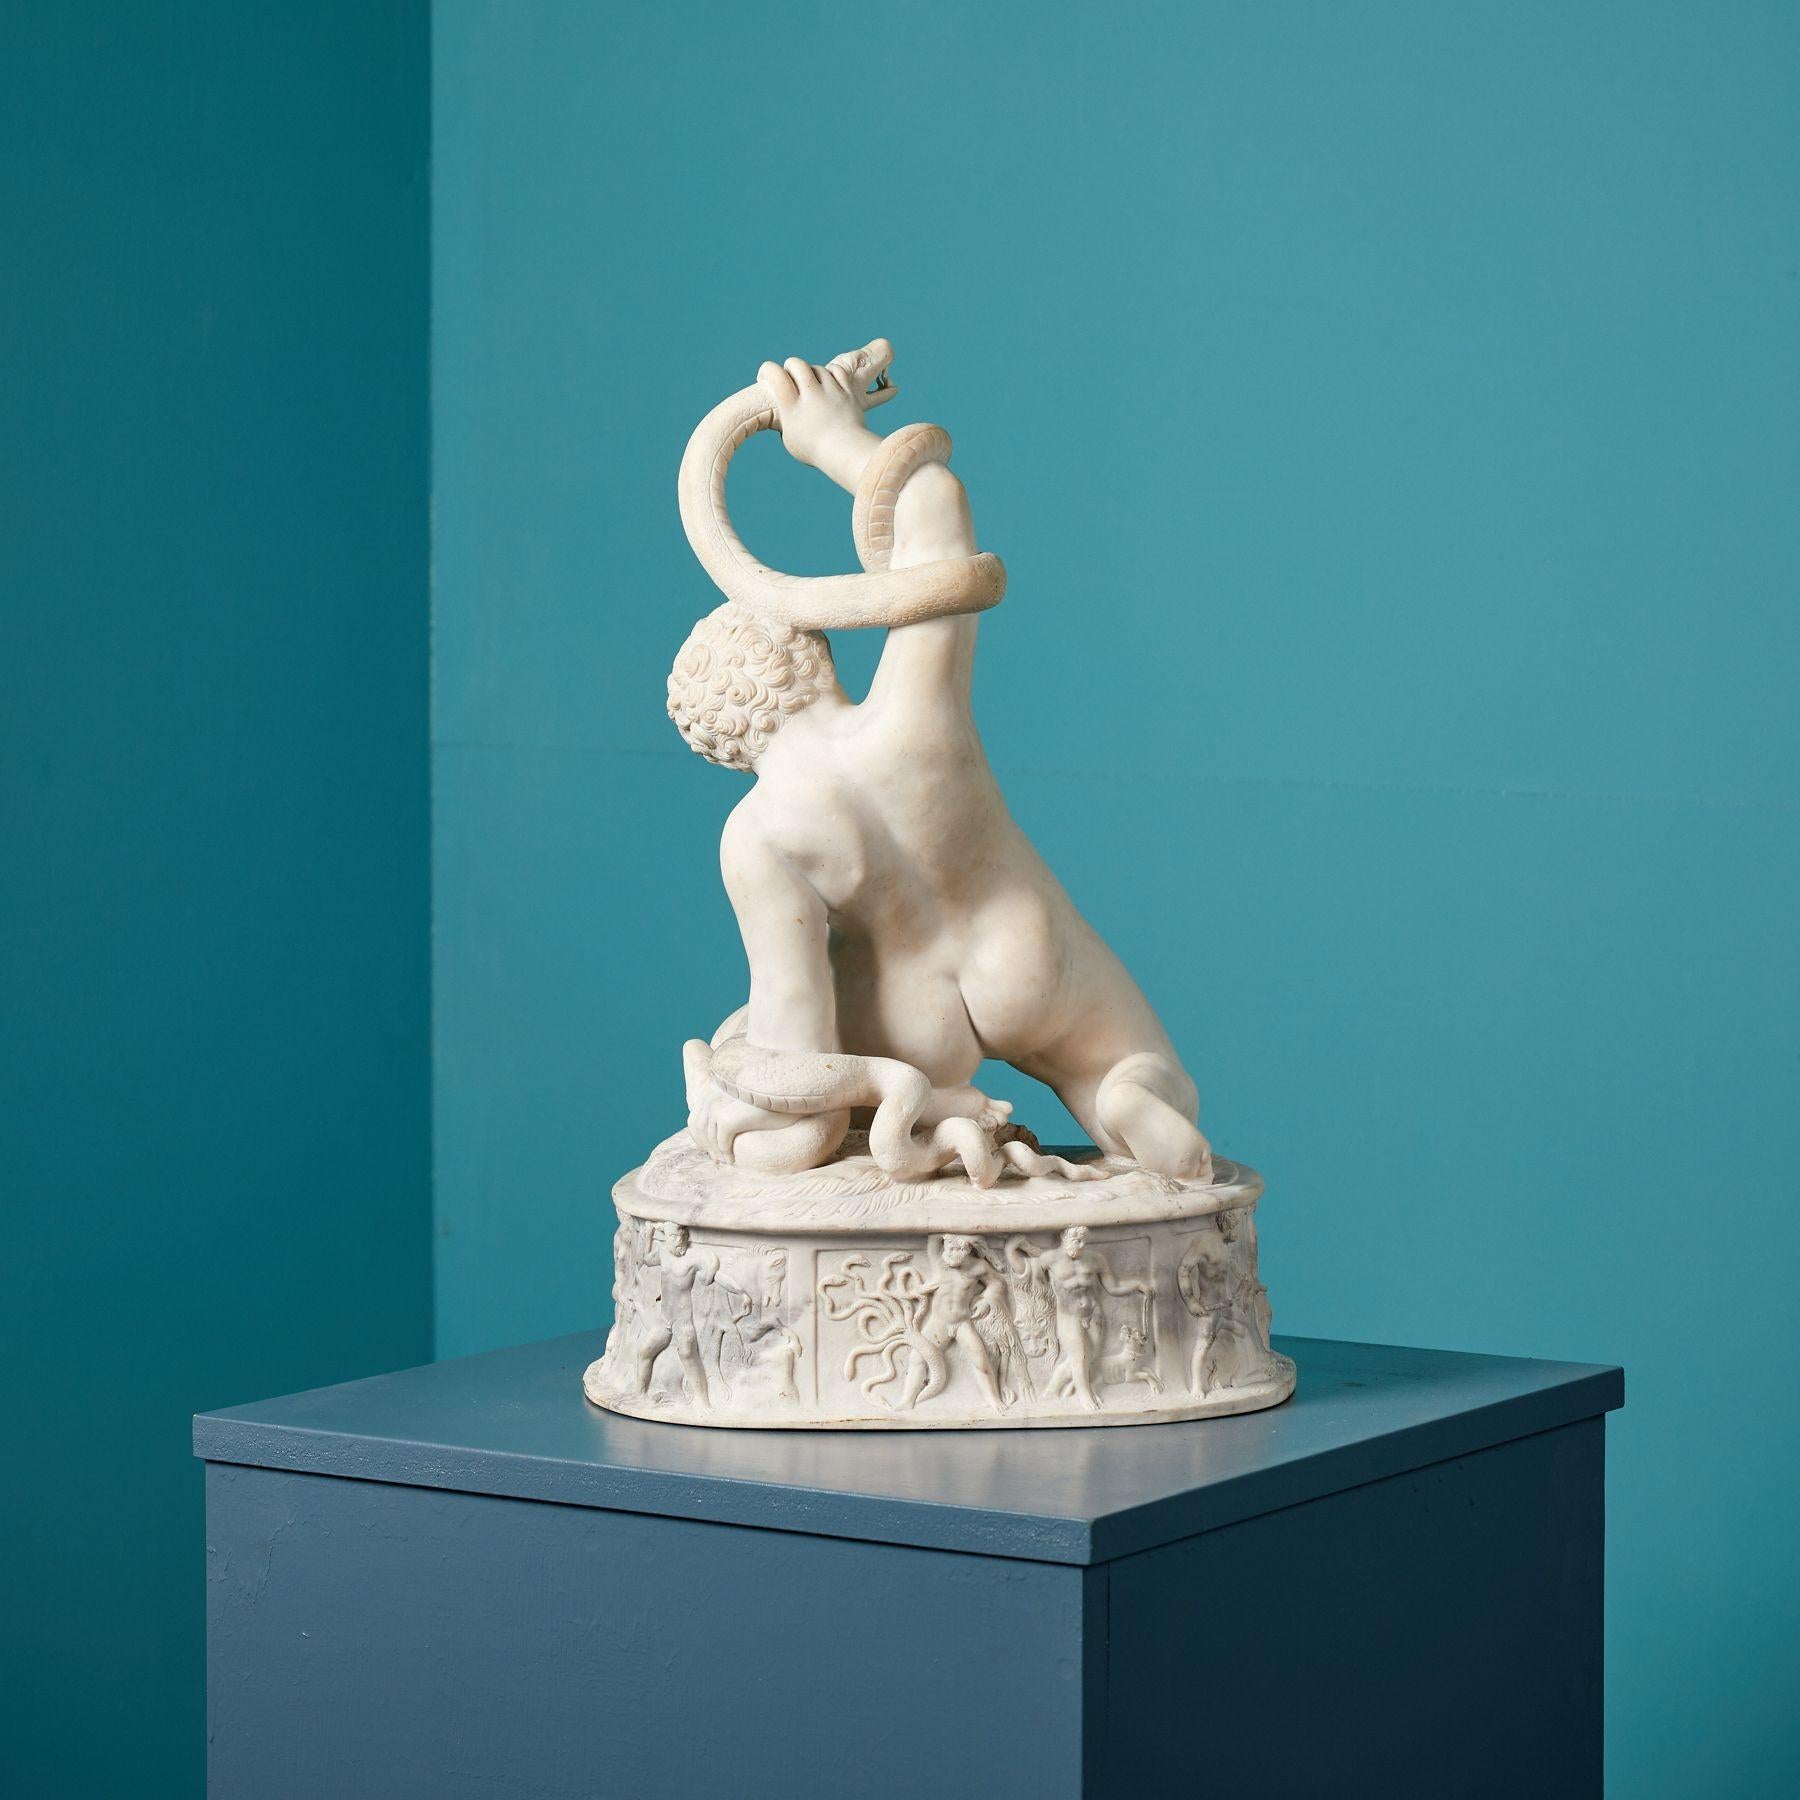 Infant Hercules Strangling Two Serpents. A 19th century, composite marble sculpture of the infant Hercules wrestling serpents, one in each hand as he kneels on a tiger skin. The plinth is edged with his ‘labours’.